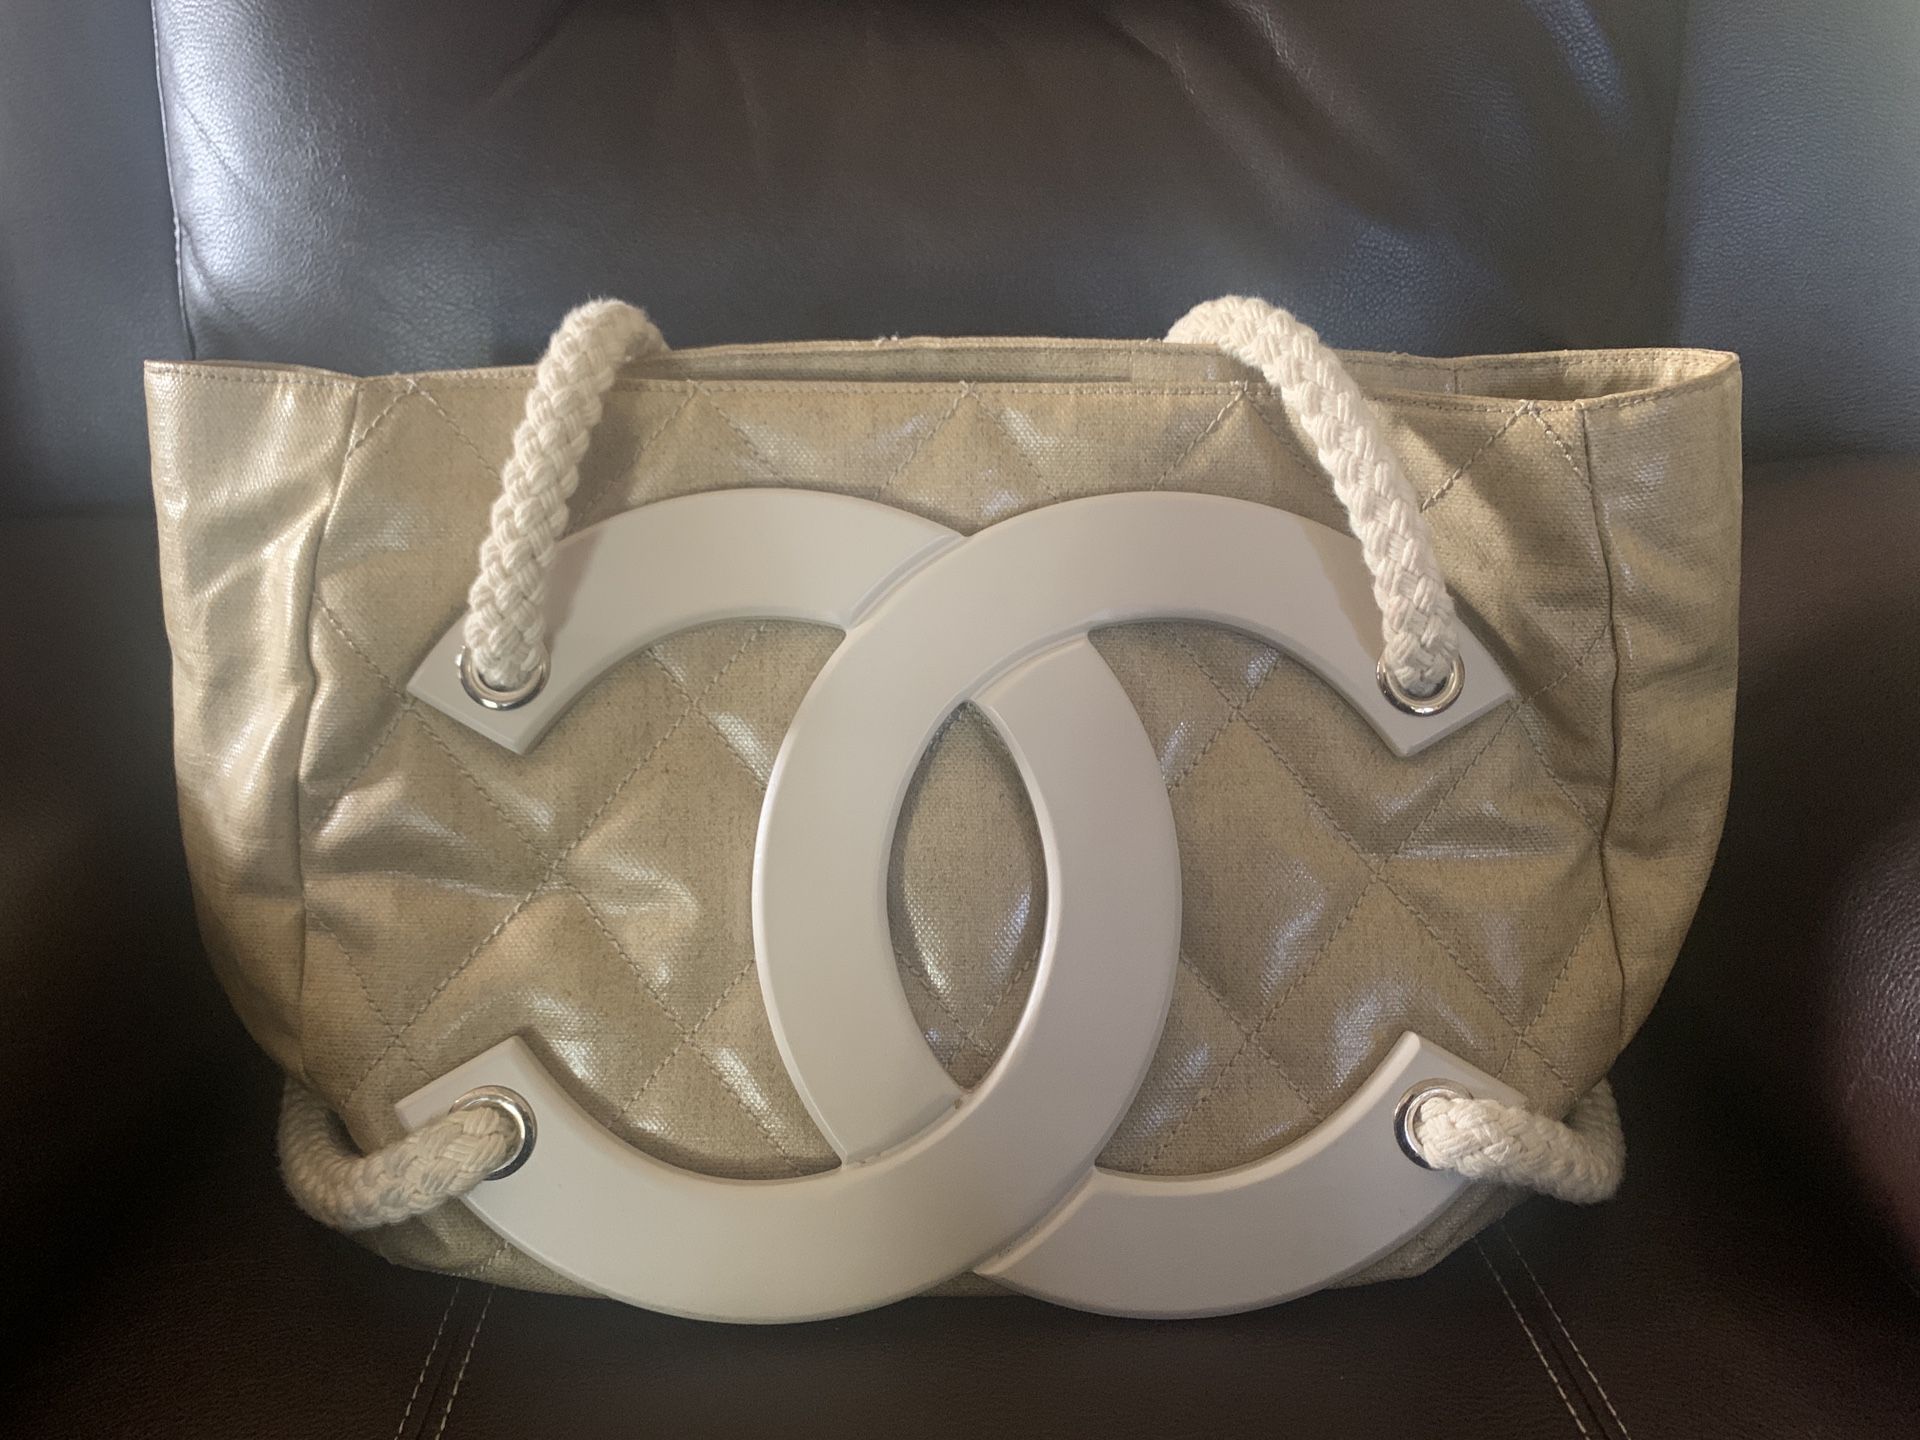 Limited Chanel Bag, Yacht Tote Bag, XL wool